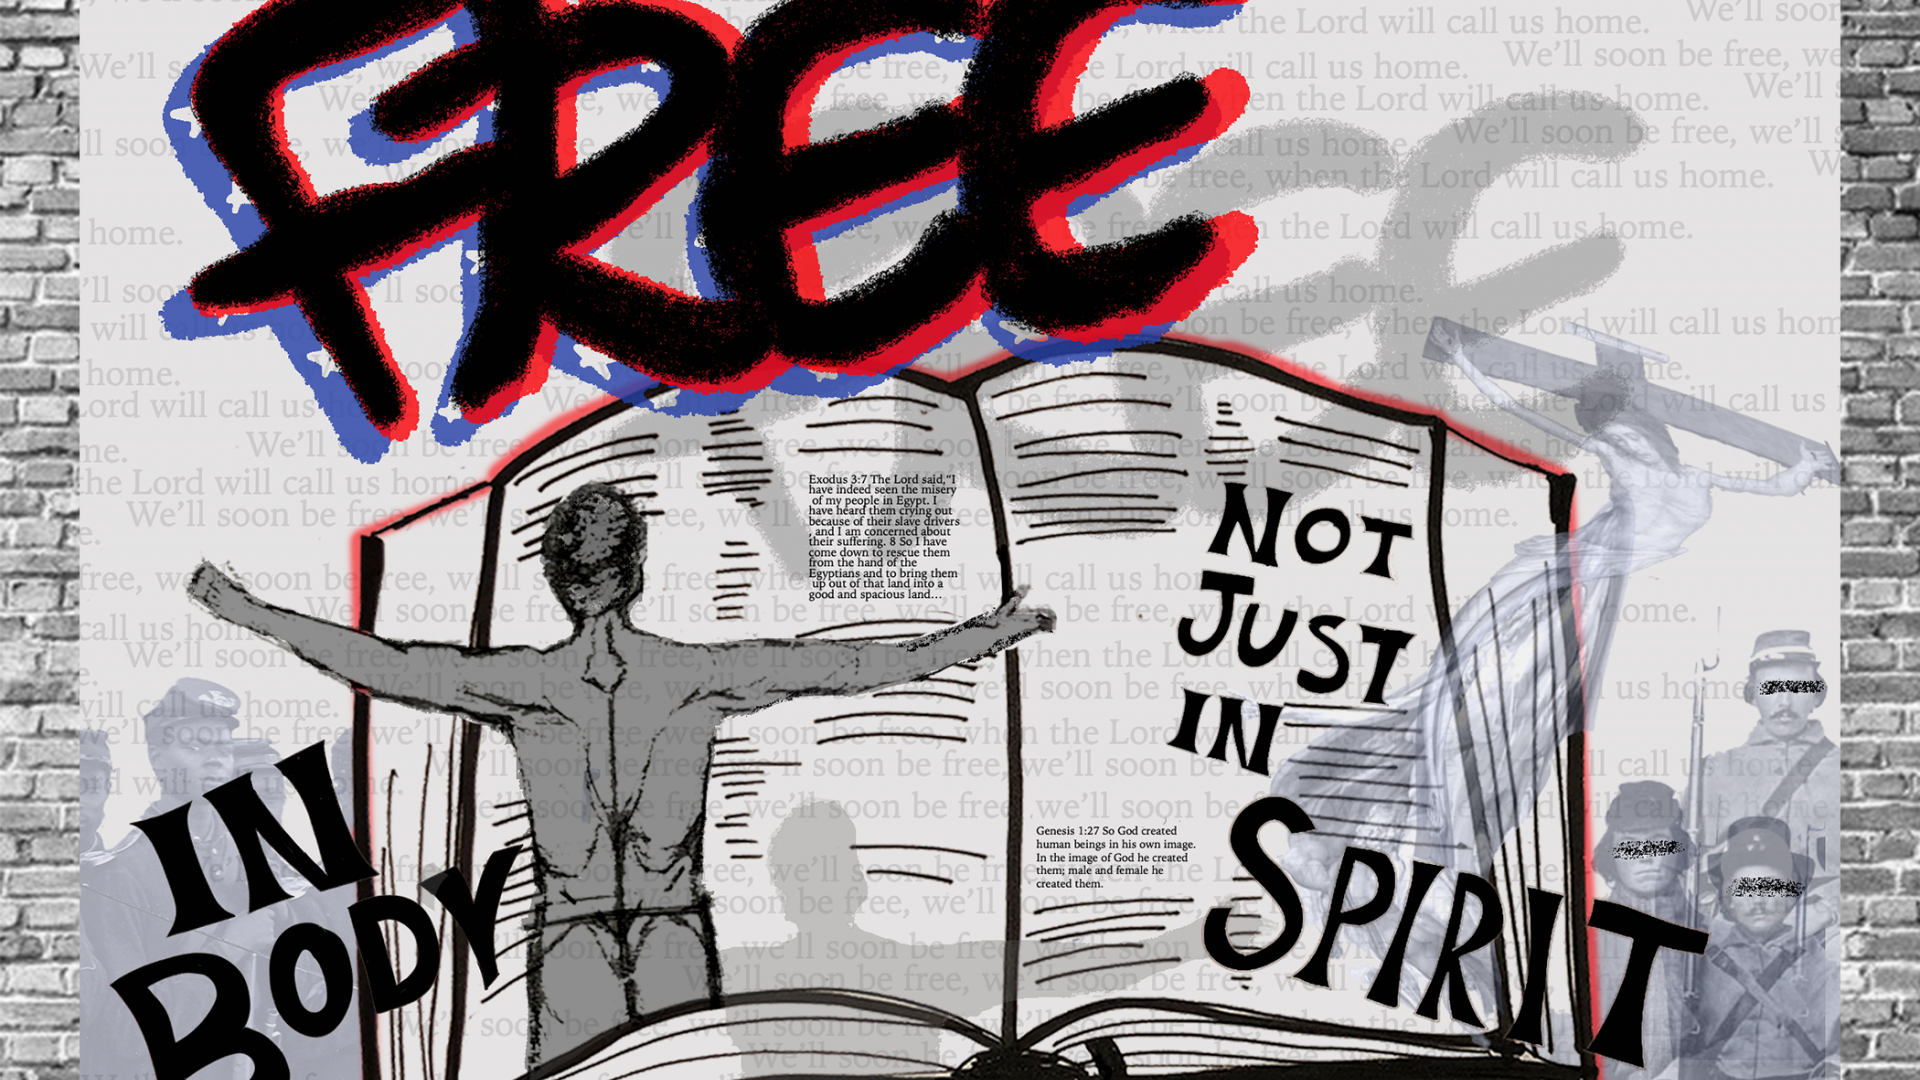 An open book with a torso with arms outstretched, words "Free, in body not just in spirit"